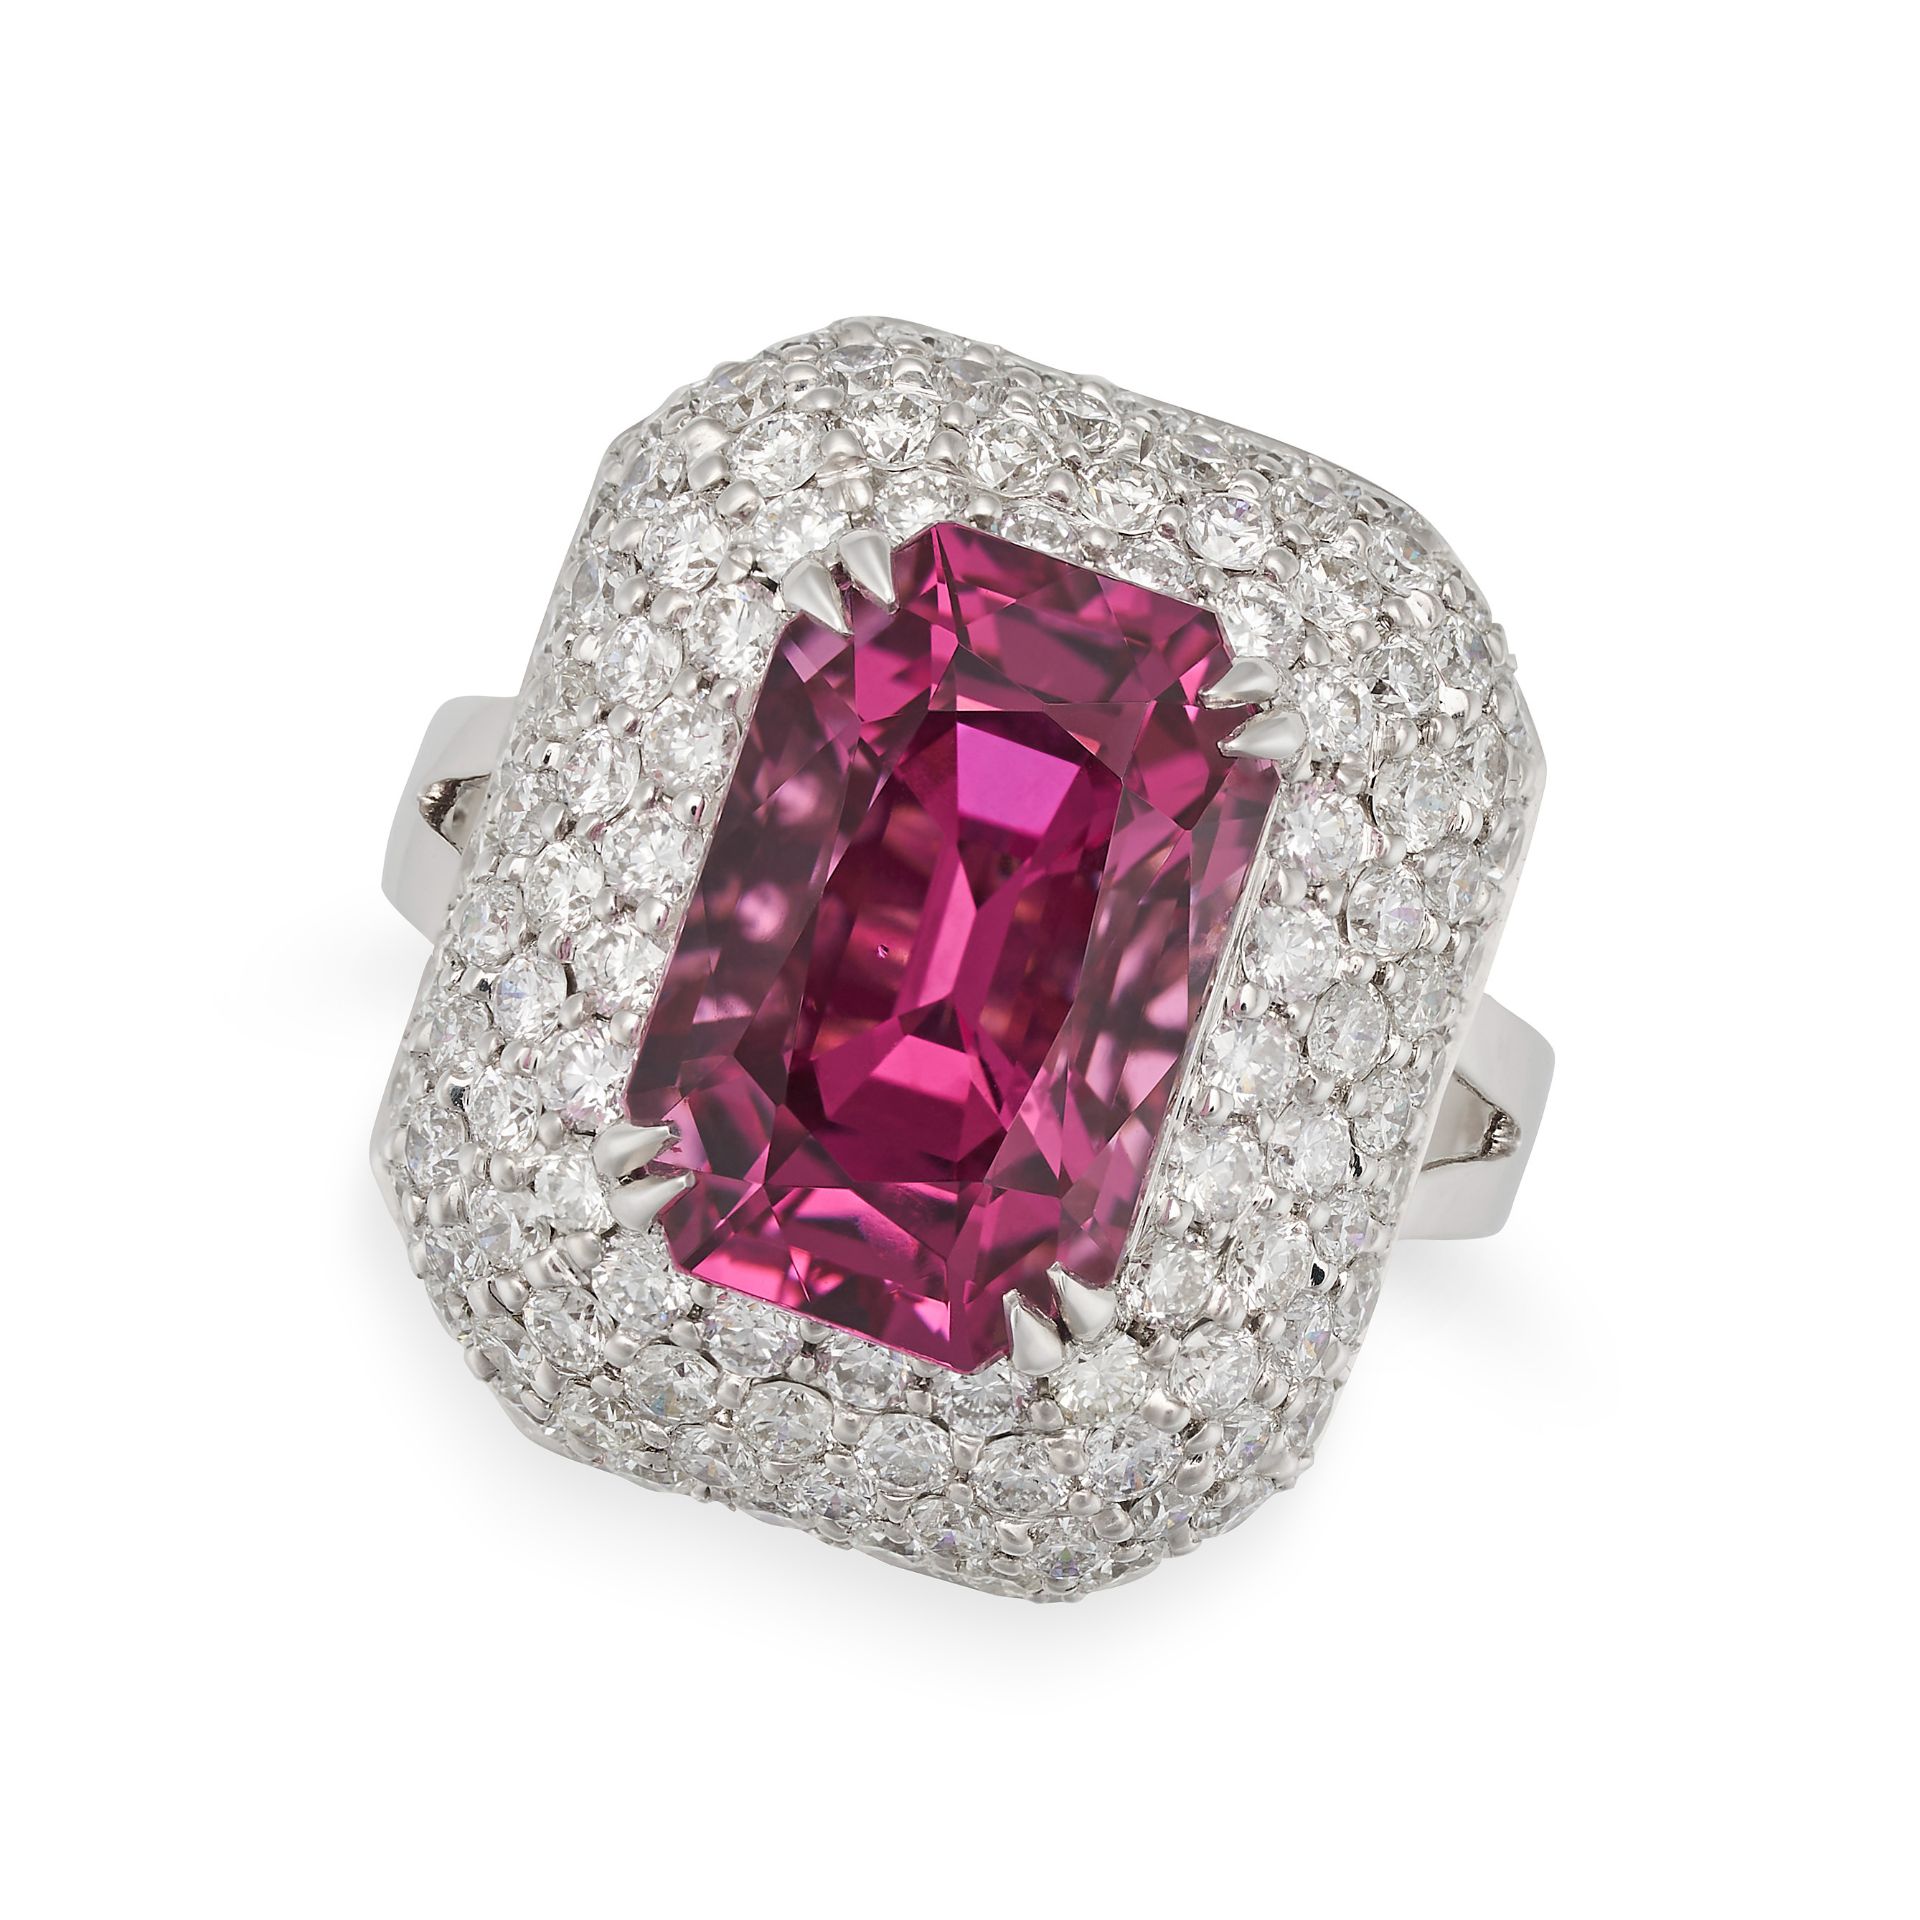 A 5.36CT UNHEATED BURMA SPINEL AND DIAMOND RING in 18ct white gold, set with a mixed cut spinel o...